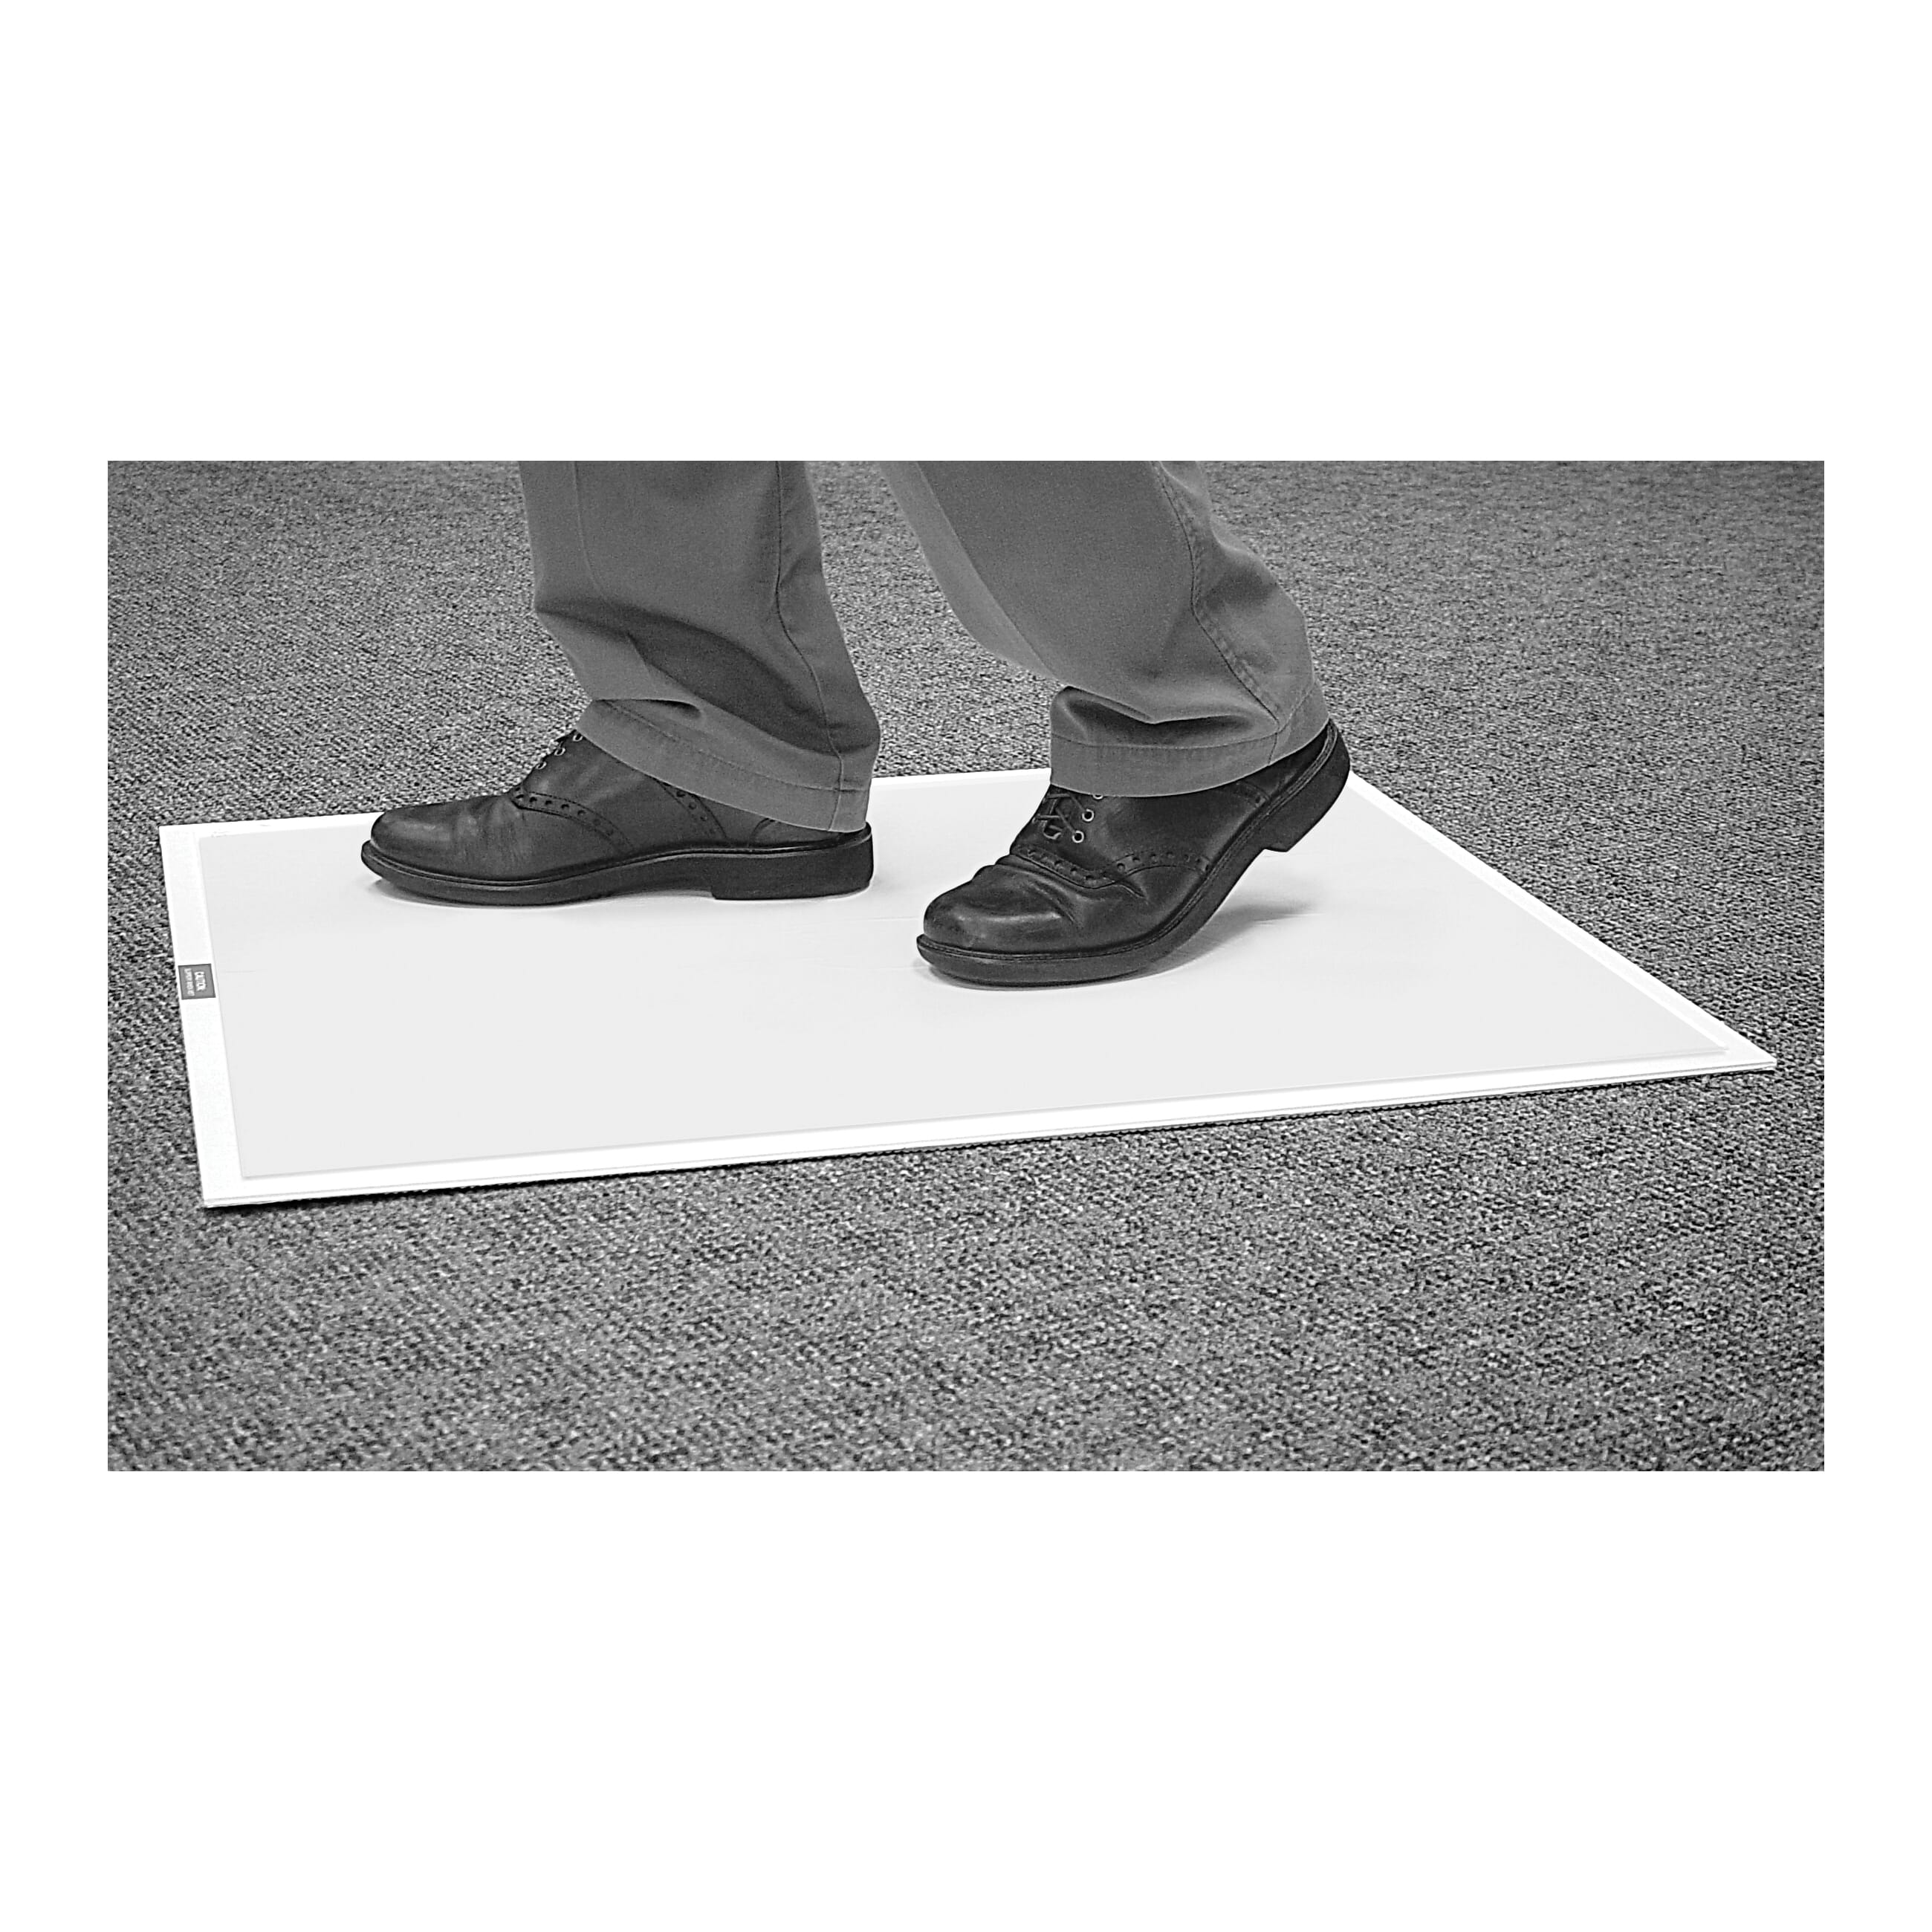 3M 5840 Backed Clean-Walk Framed Mat, 31-1/2 in L x 25-1/2 in W, Acrylic Adhesive, 60 Sheets perat